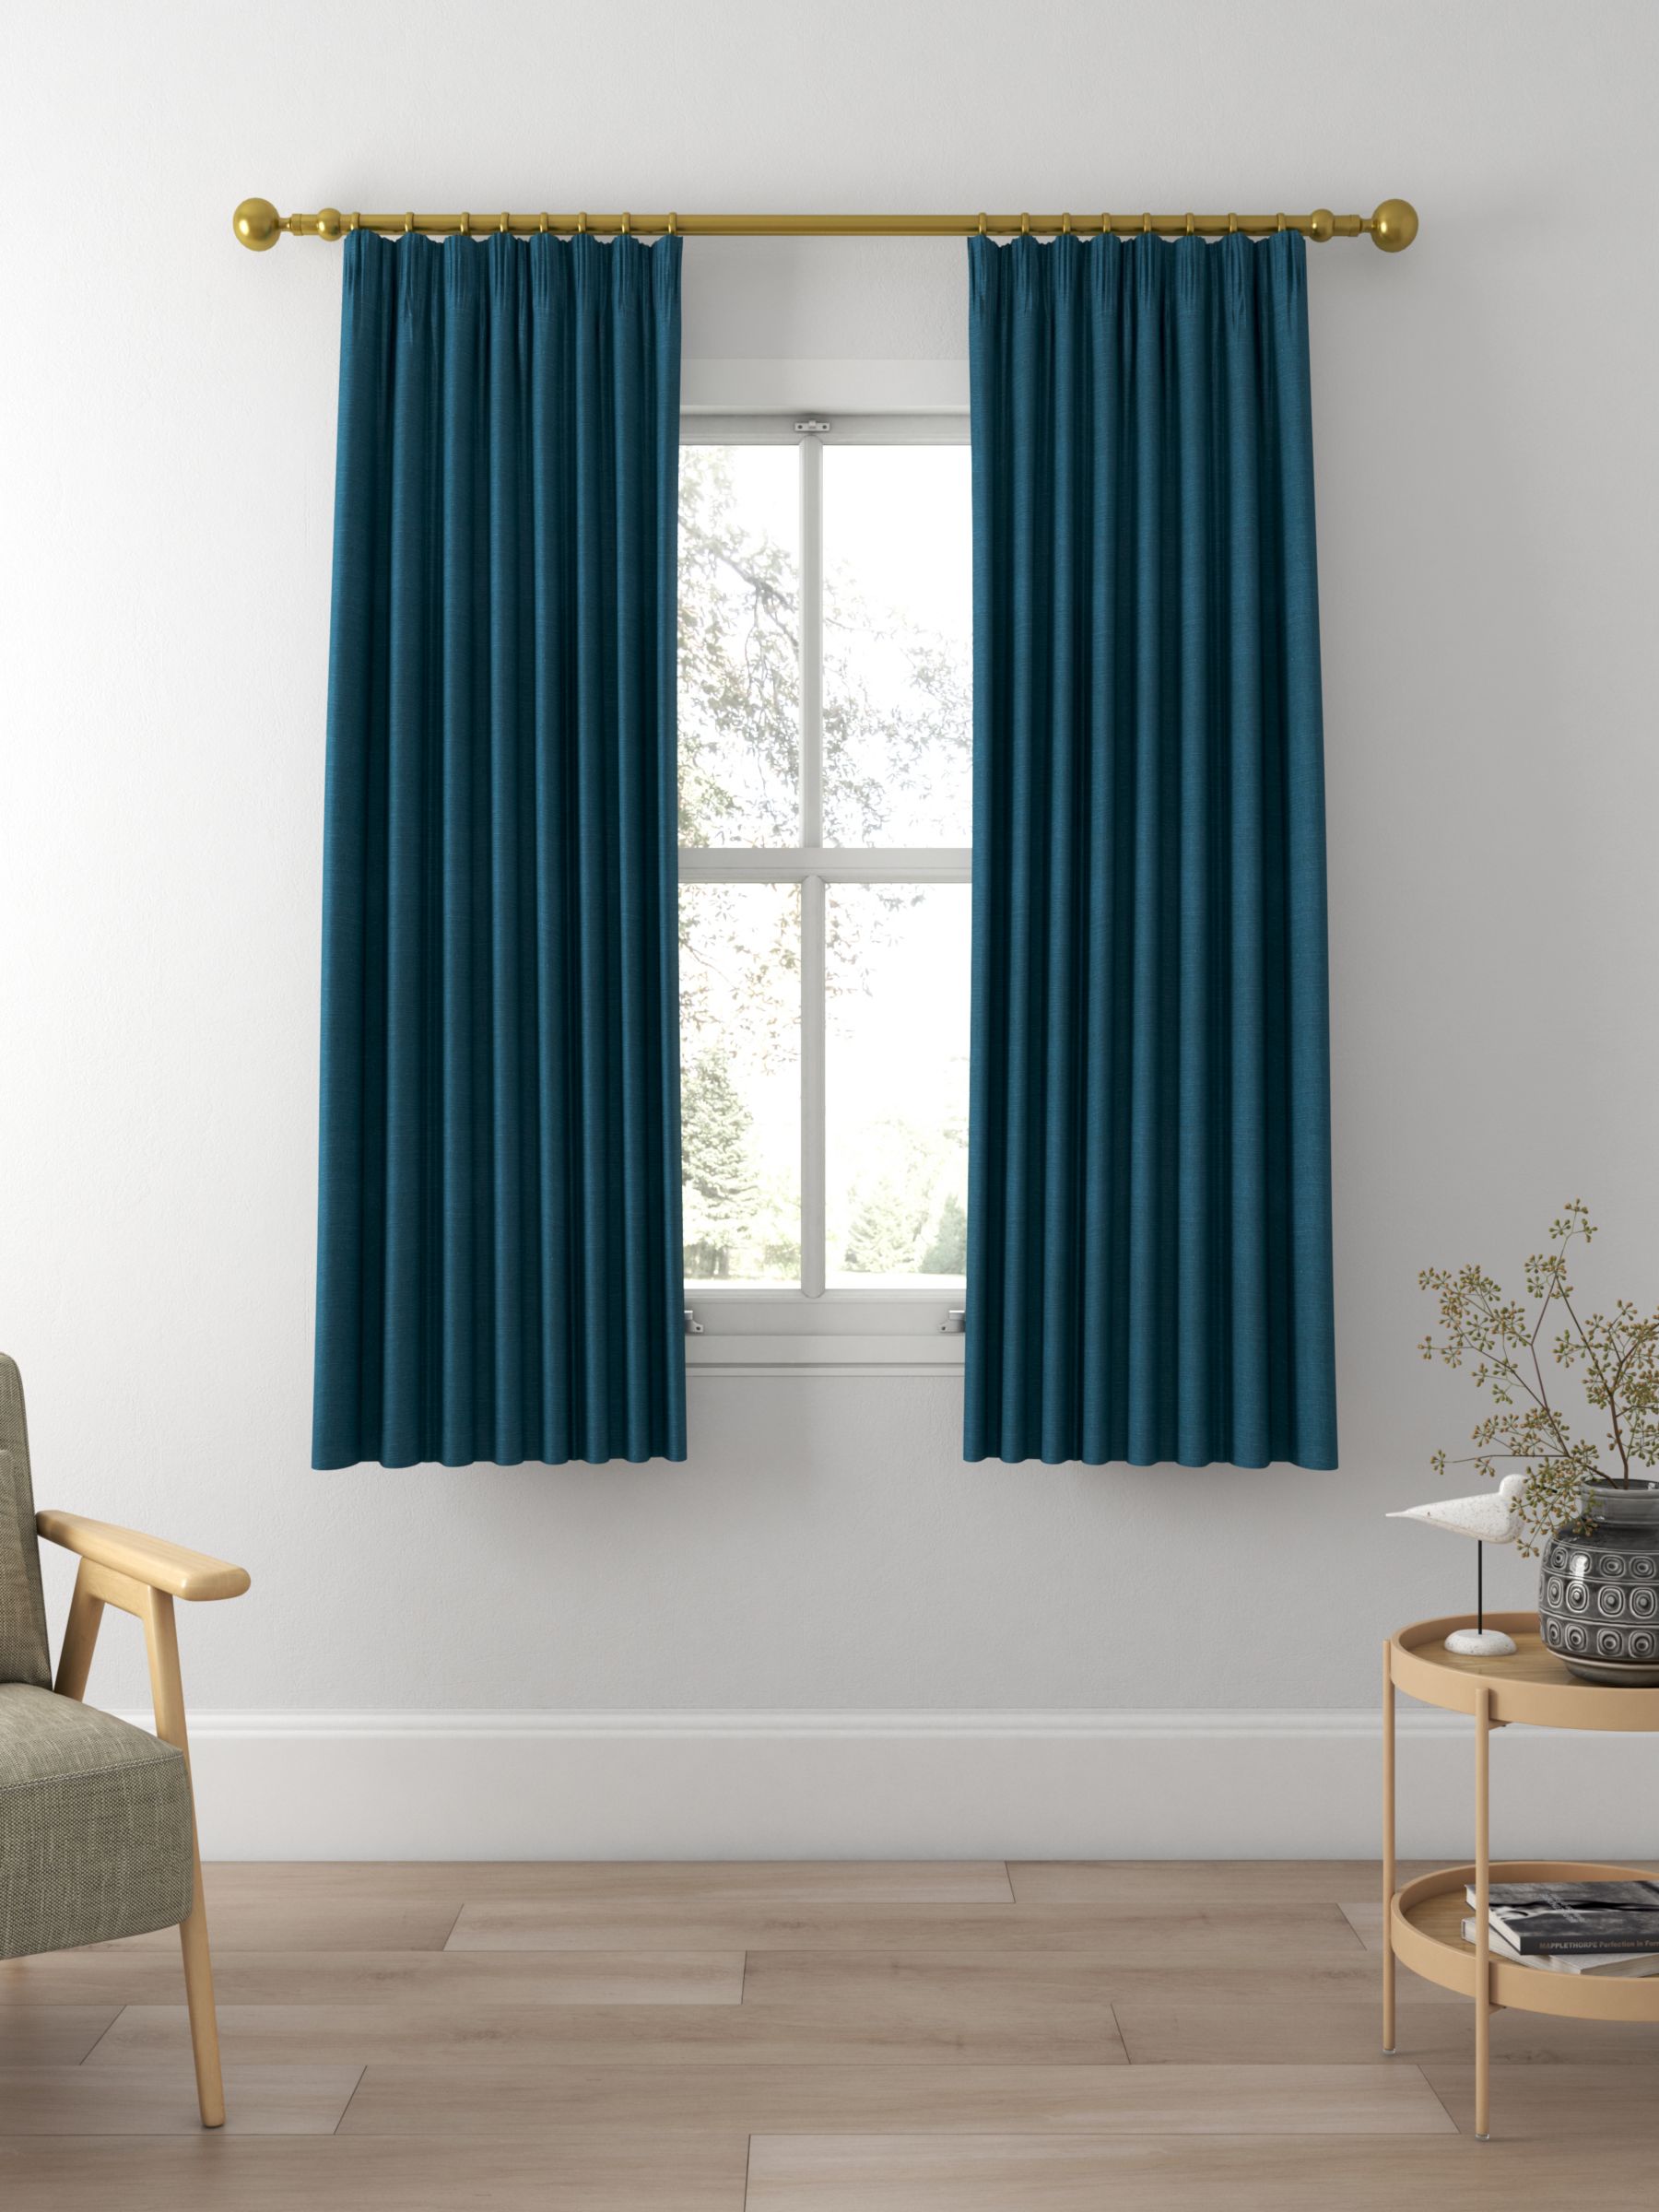 Sanderson Tuscany II Made to Measure Curtains, Newby Green